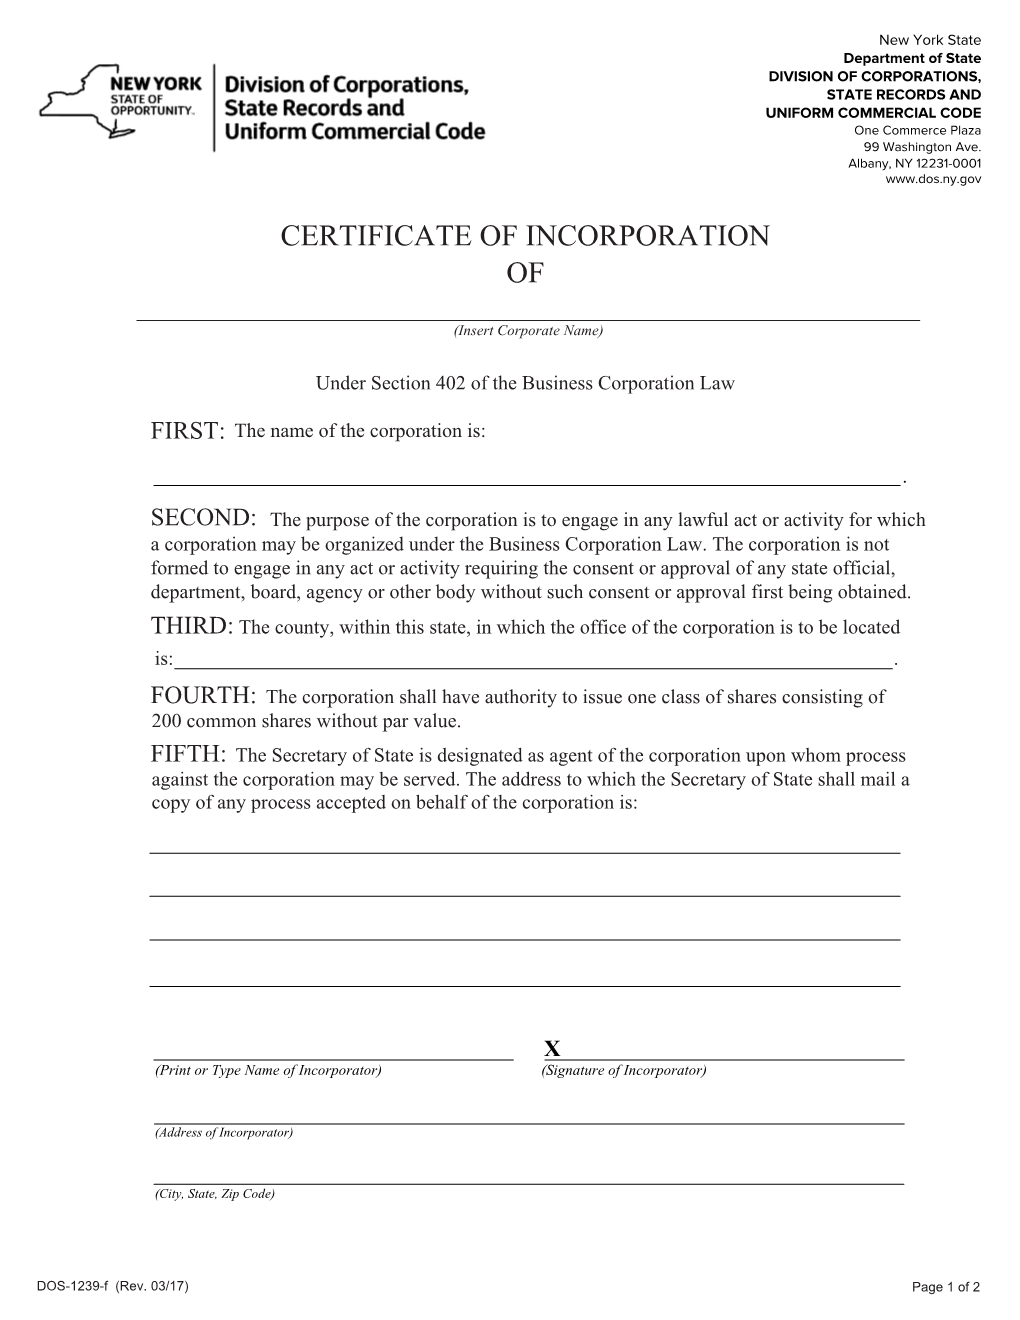 Certificate of Incorporation Of